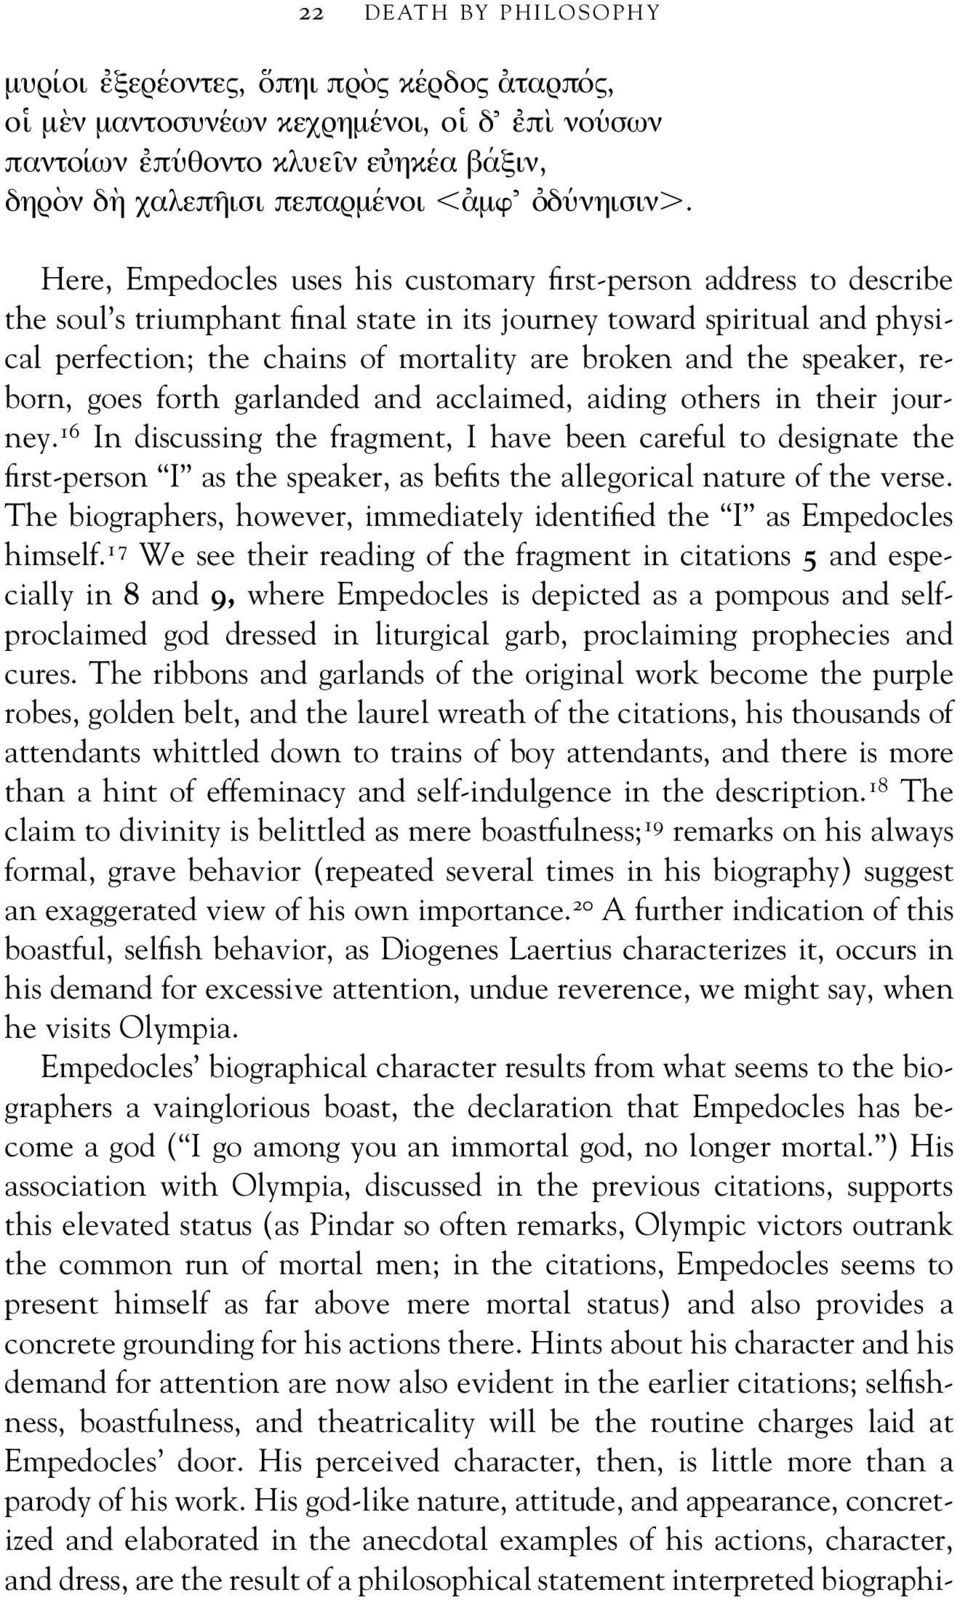 Here, Empedocles uses his customary first-person address to describe the soul s triumphant final state in its journey toward spiritual and physical perfection; the chains of mortality are broken and